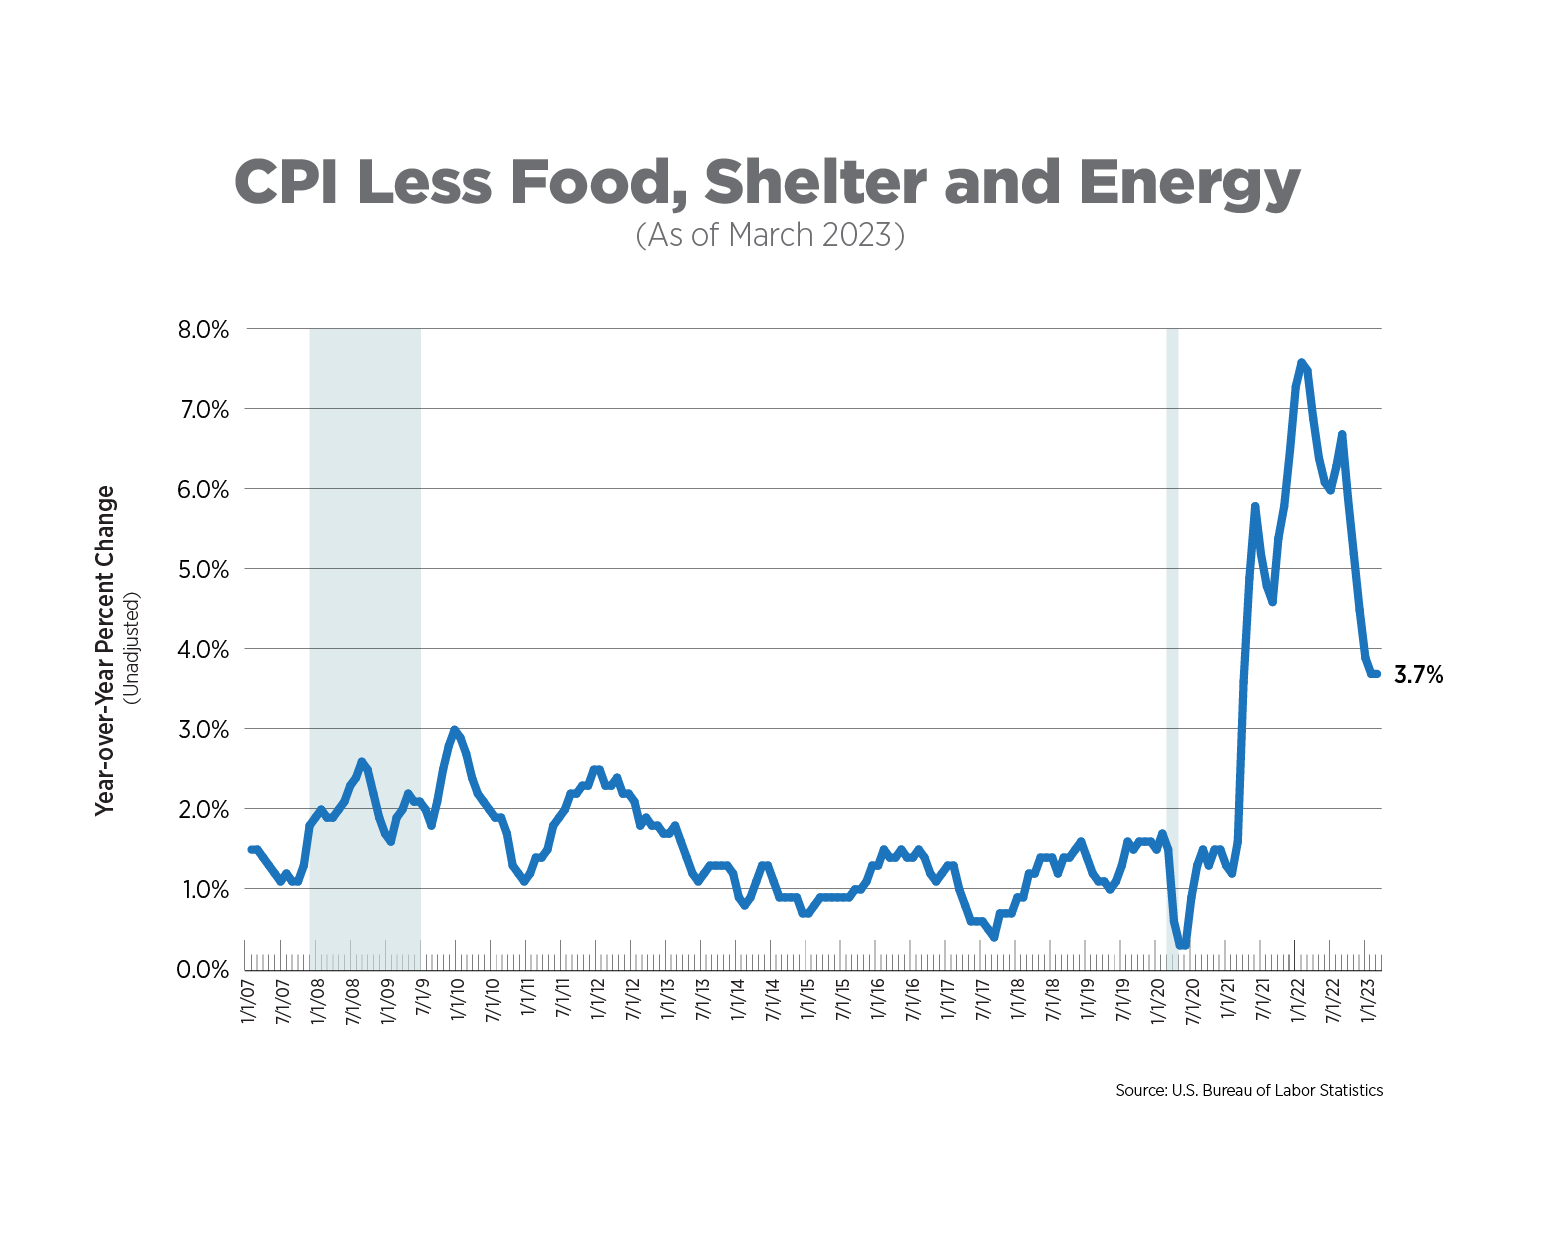 cpi less food, shelter, and energy as of march 2023